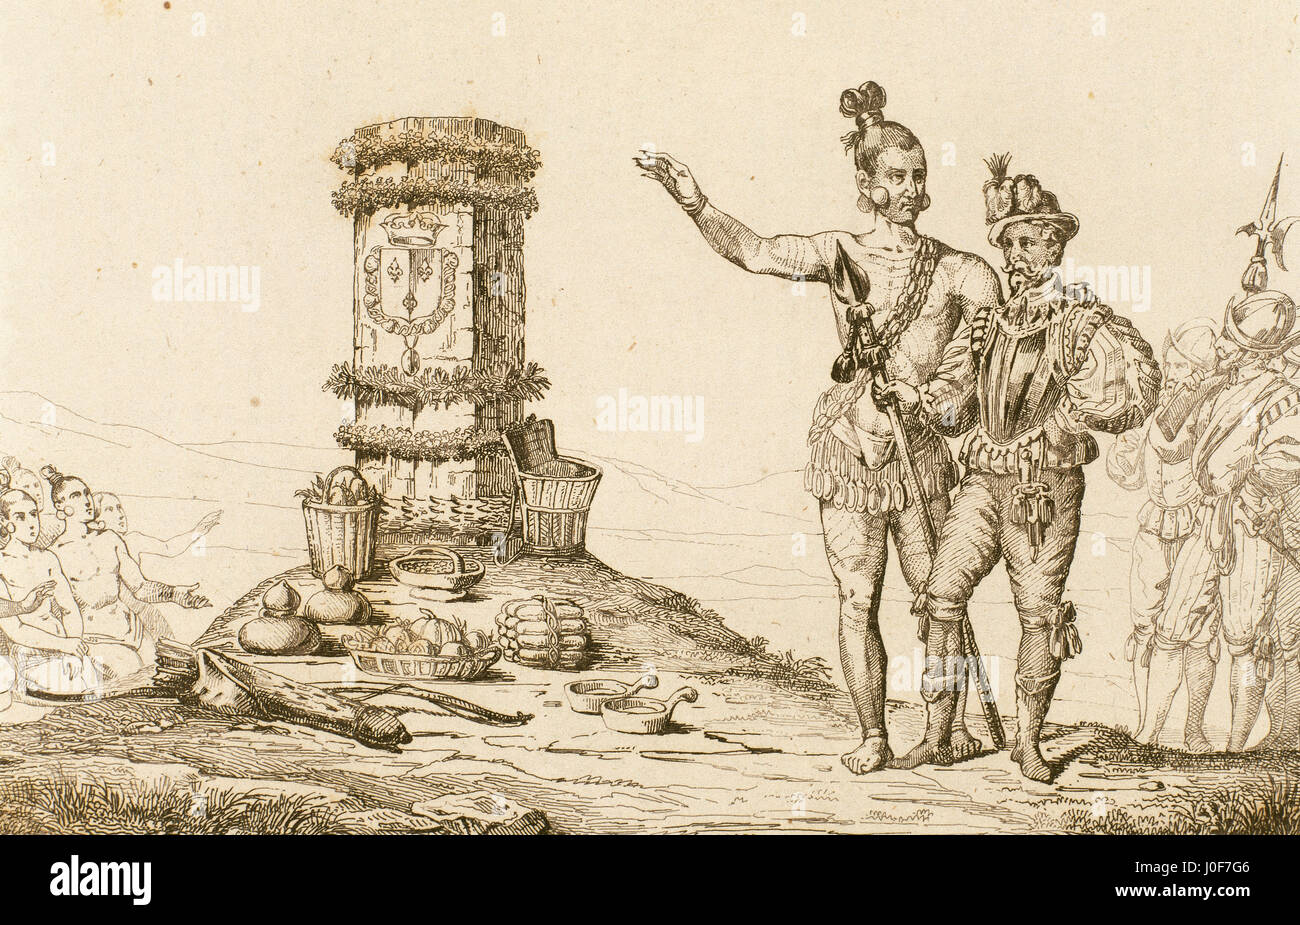 The French explorer Rene Goulaine de Laudonniere (1529-1574) and the Indian Chief Athore visit the Jean Ribault's (1520-1565) column, erected in 1568 in the Northern Florida. Engraving, 1841. Stock Photo